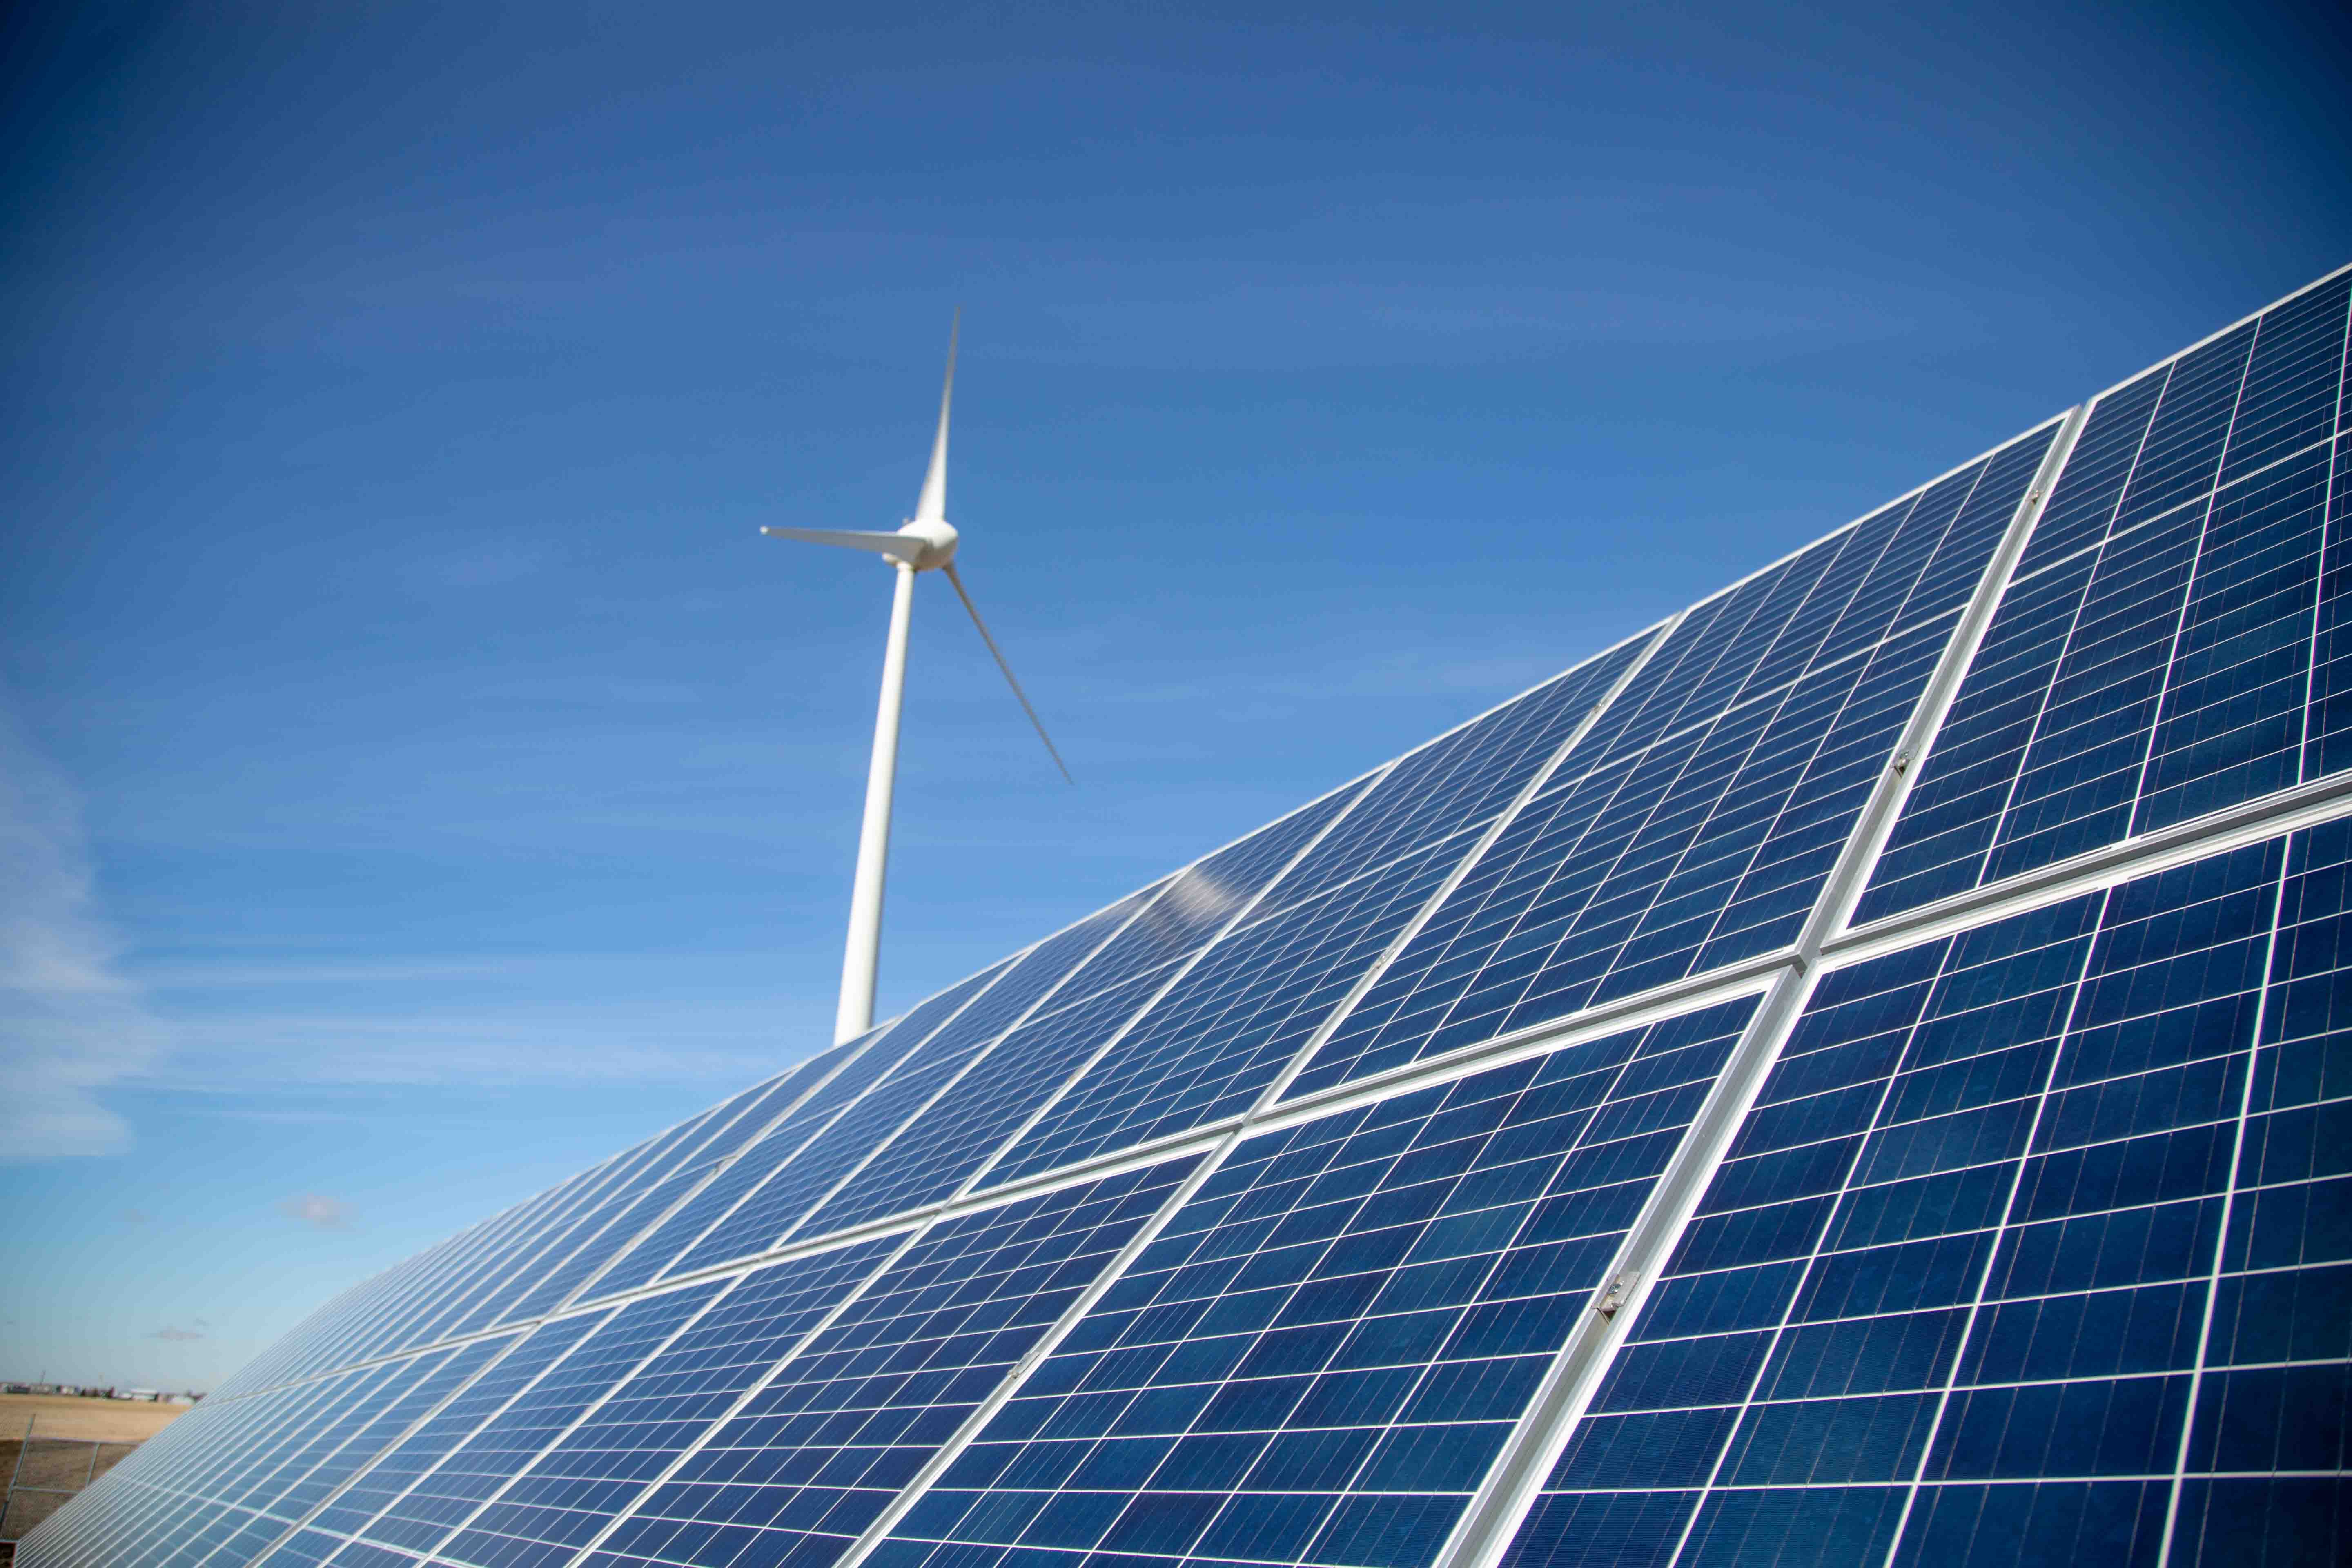 src helped design a hybrid wind and solar energy system